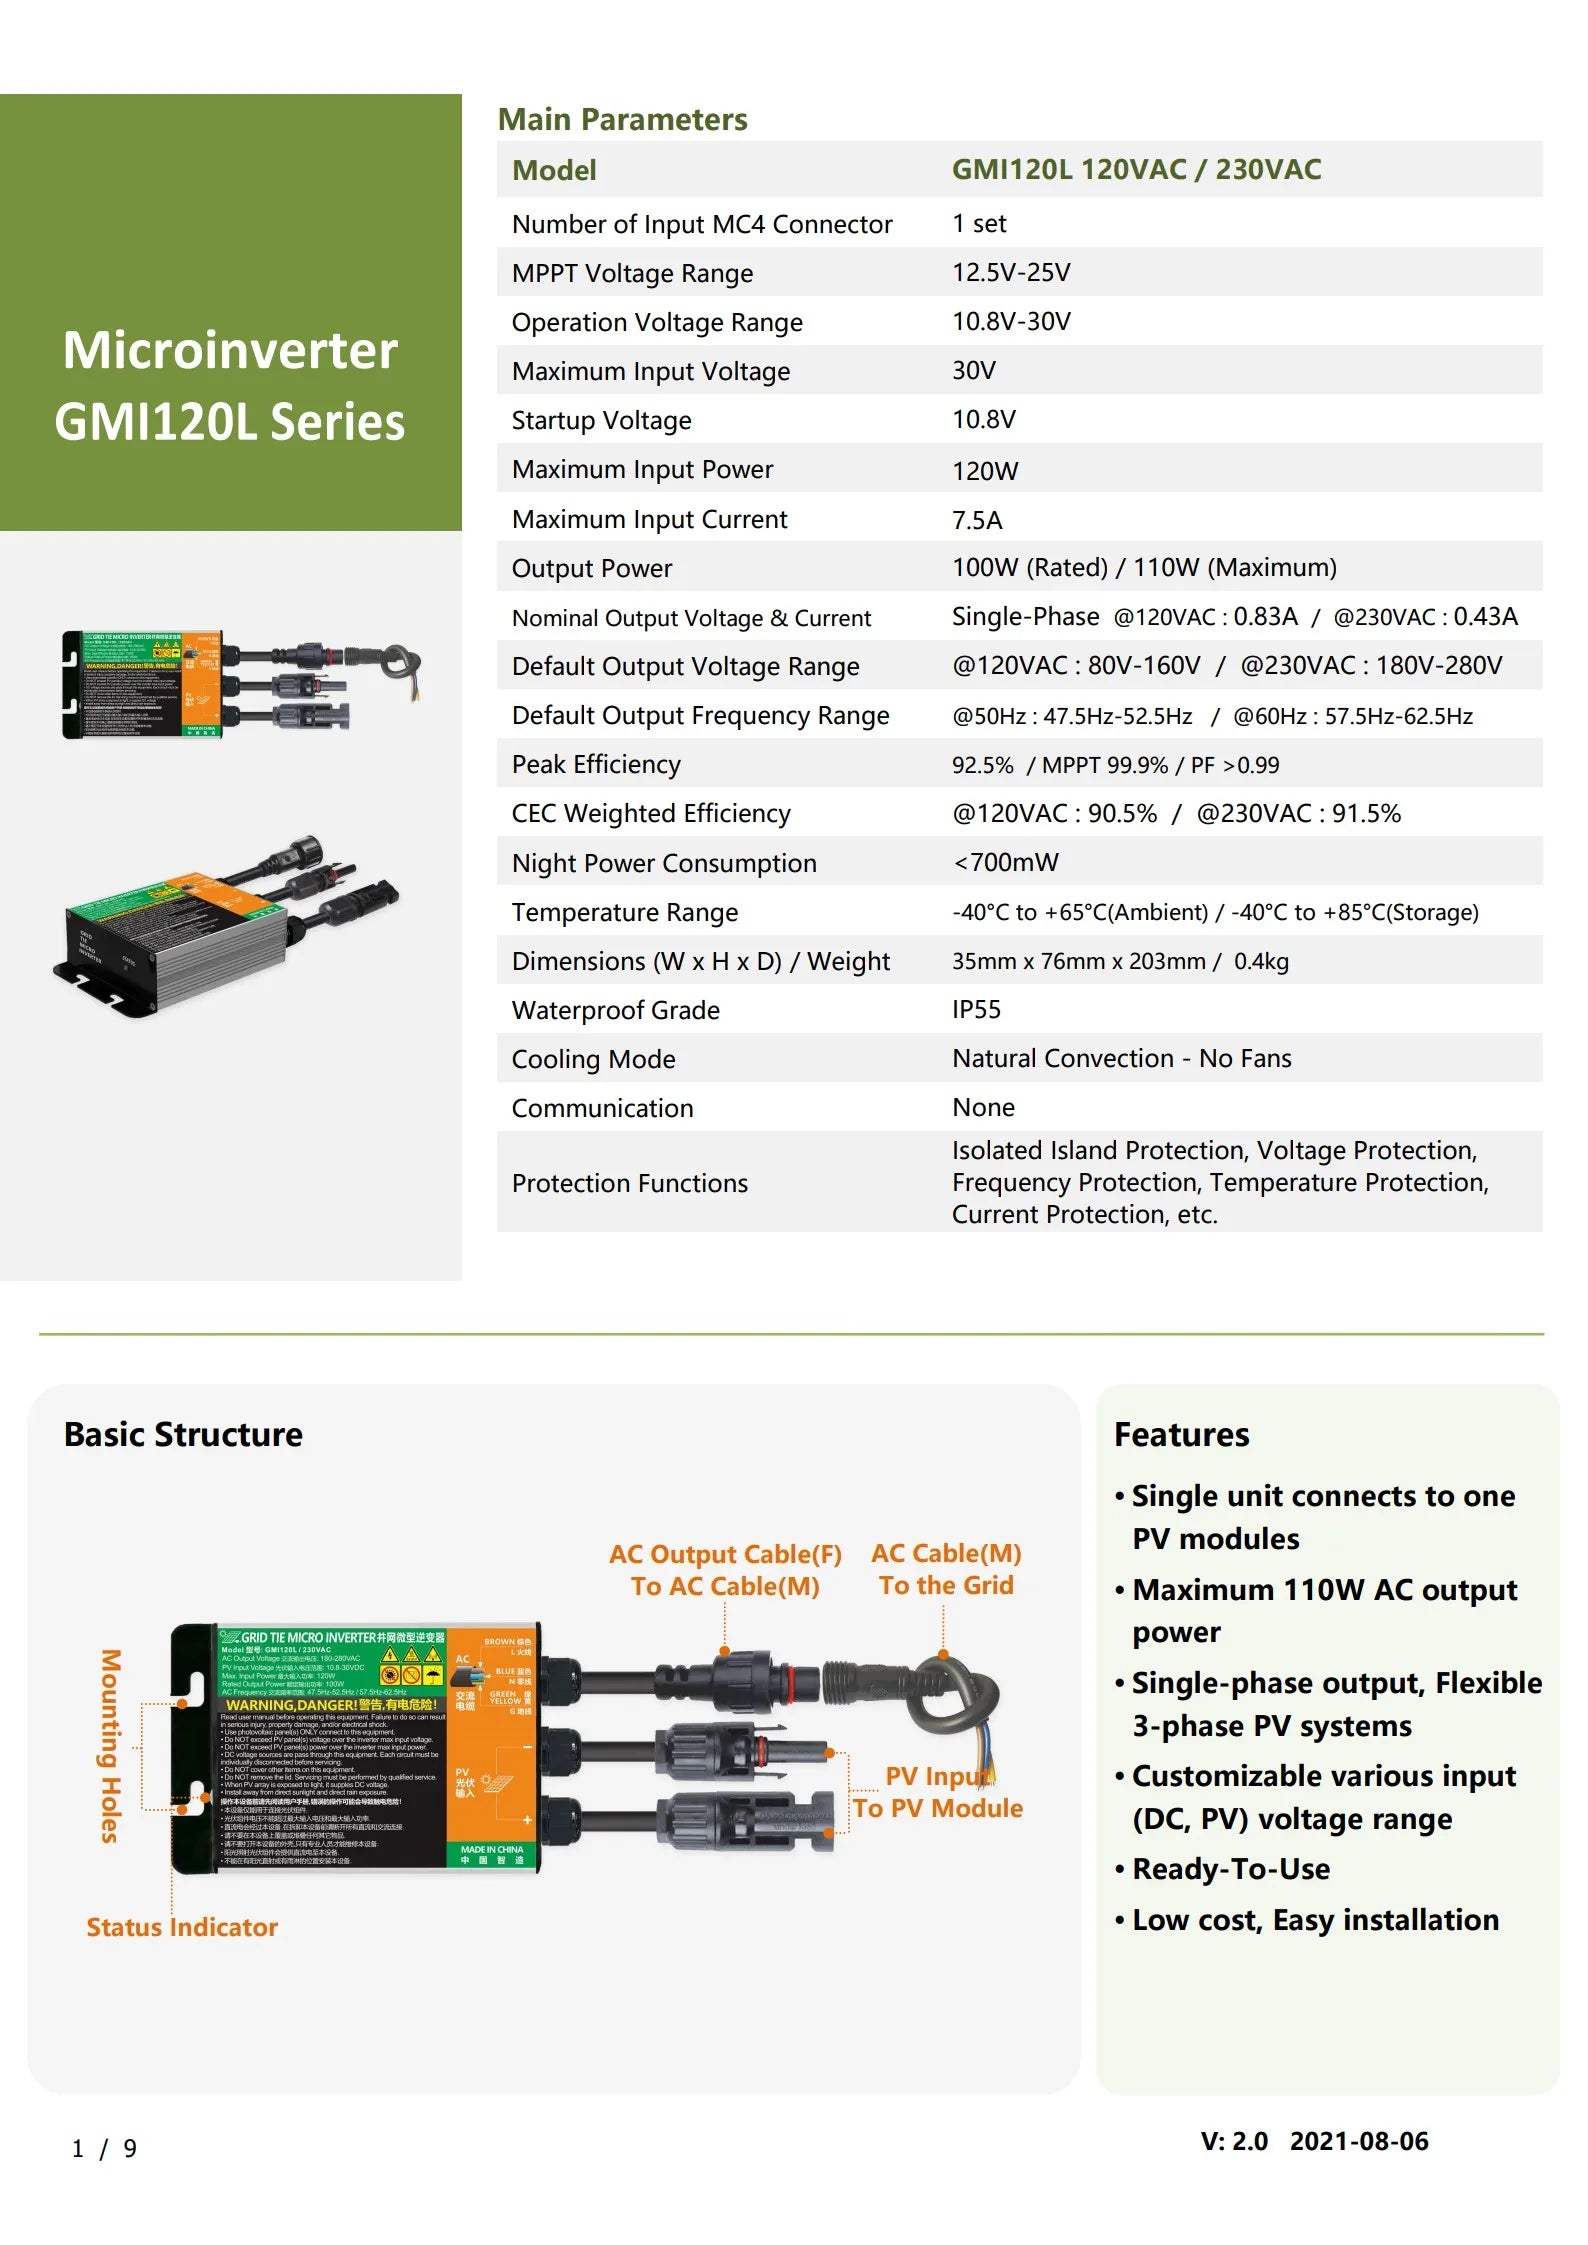 GMI Series micro inverter for grid tie solar power systems, converting DC voltage to AC voltage.